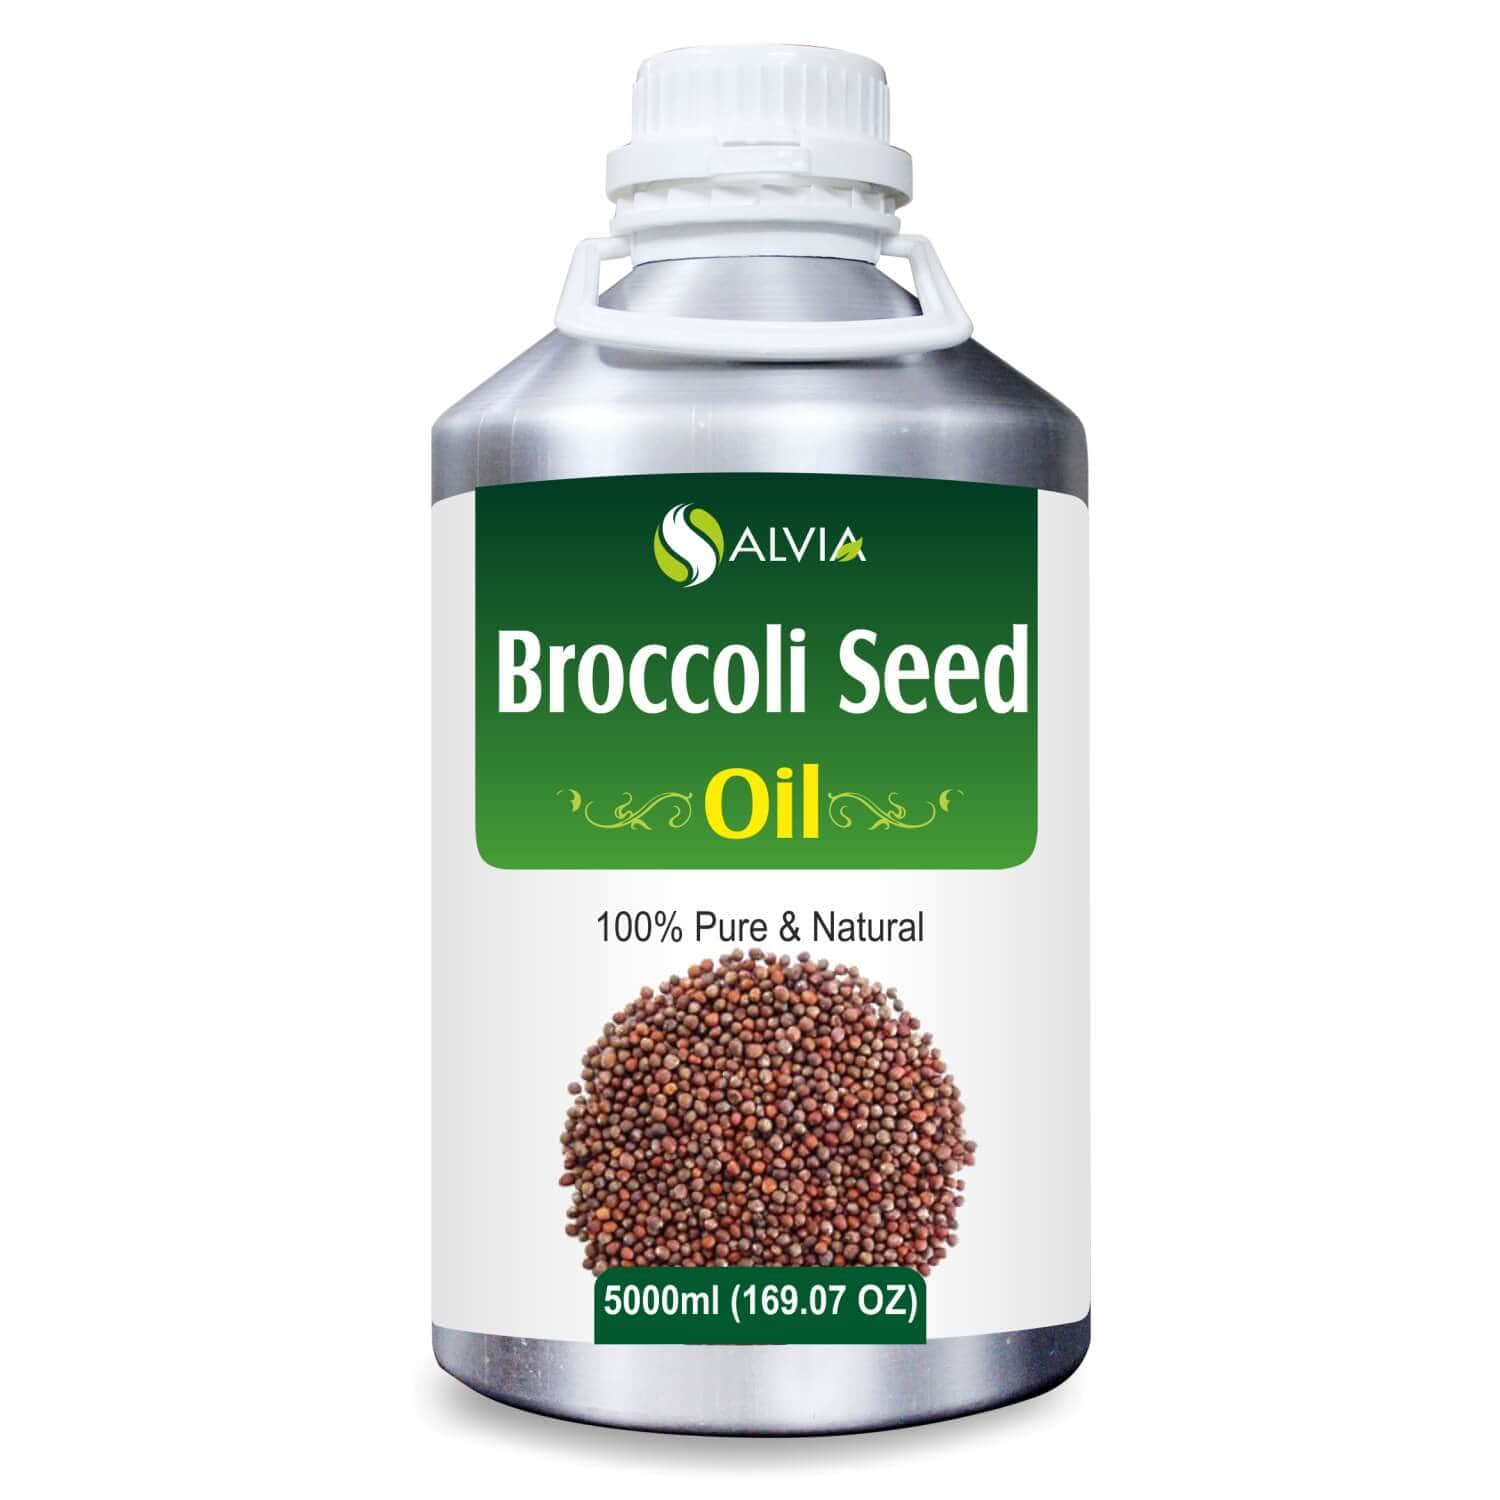 Salvia Natural Carrier Oils 5000ml Broccoli Seed Oil (Brassica-Oleracea) Pure Natural Carrier Oil For Skin & hair